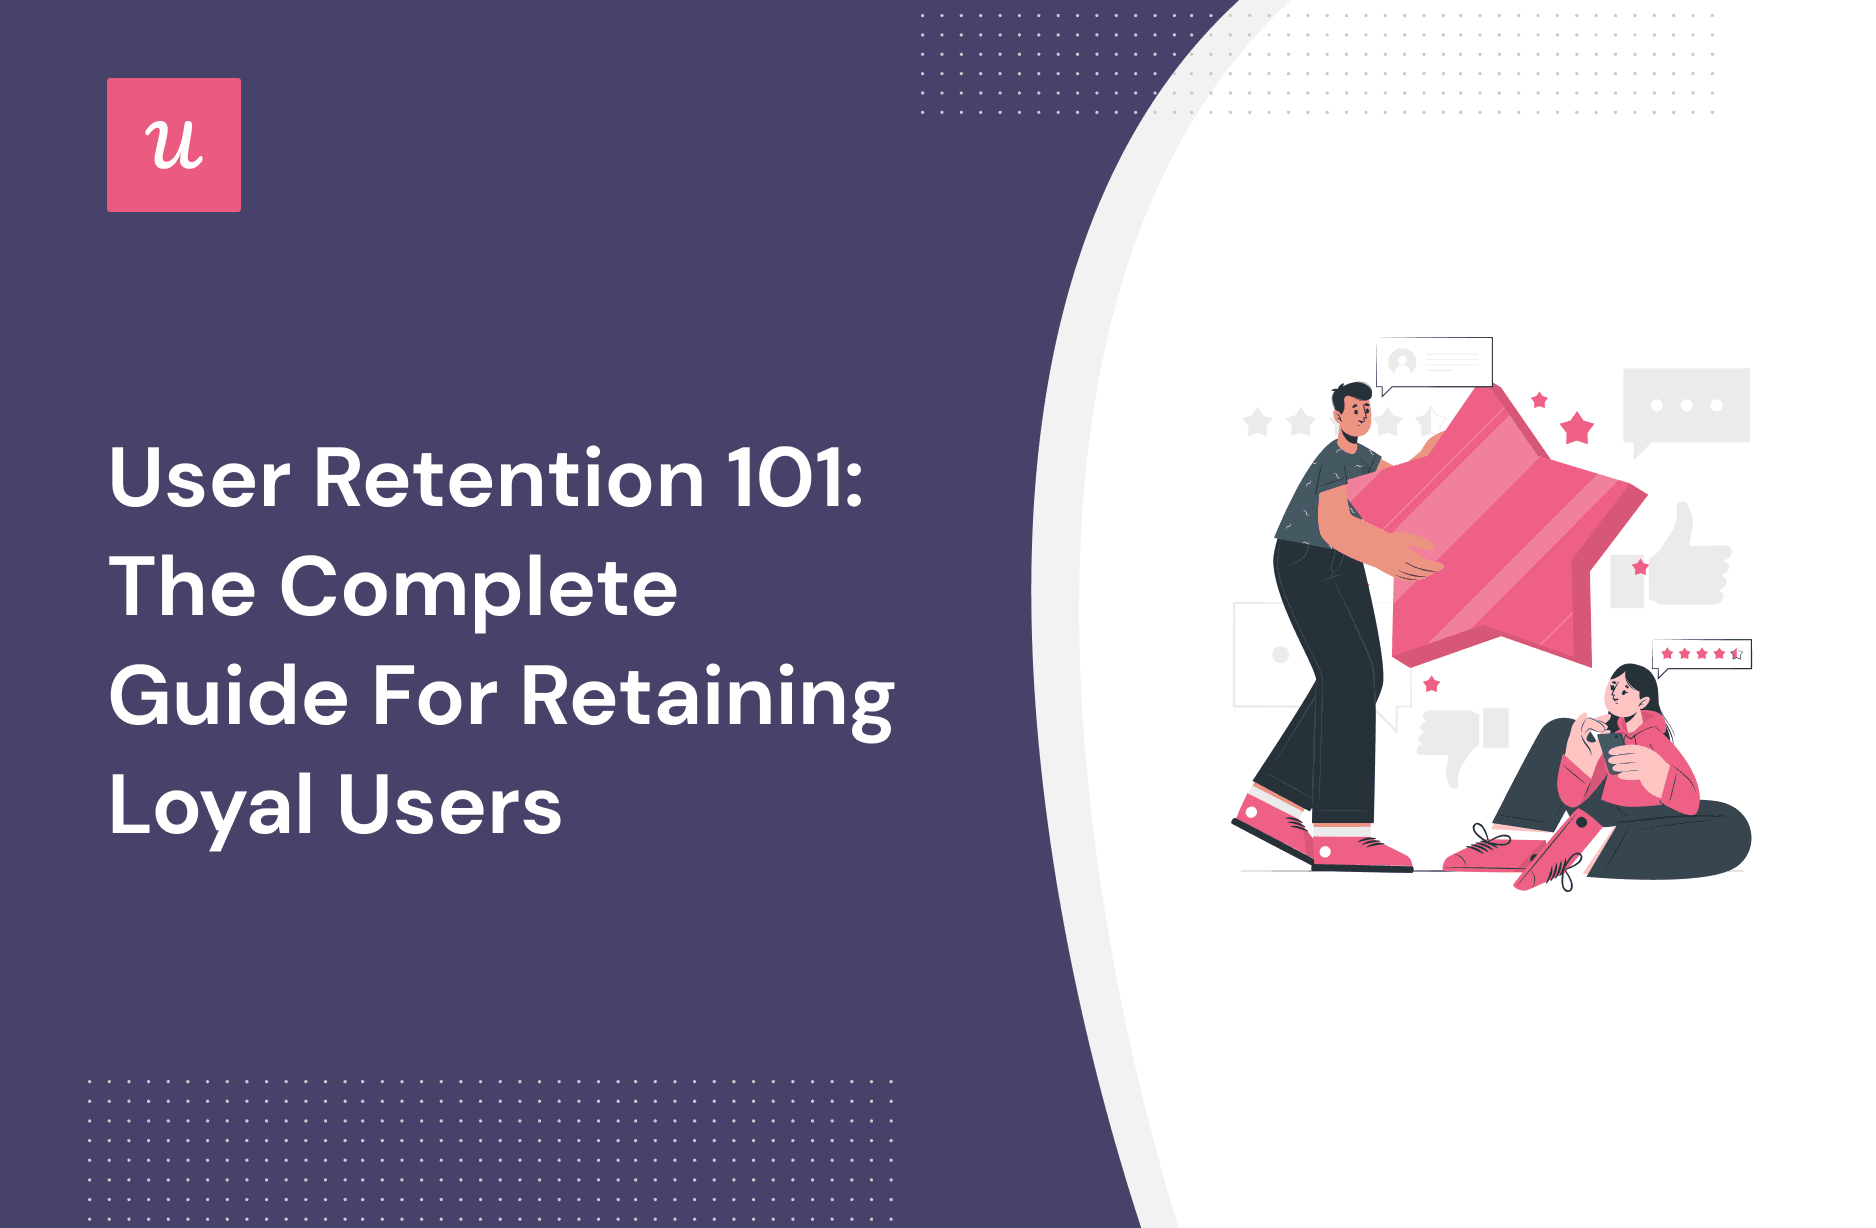 User Retention 101: The Complete Guide for Retaining Loyal Users cover